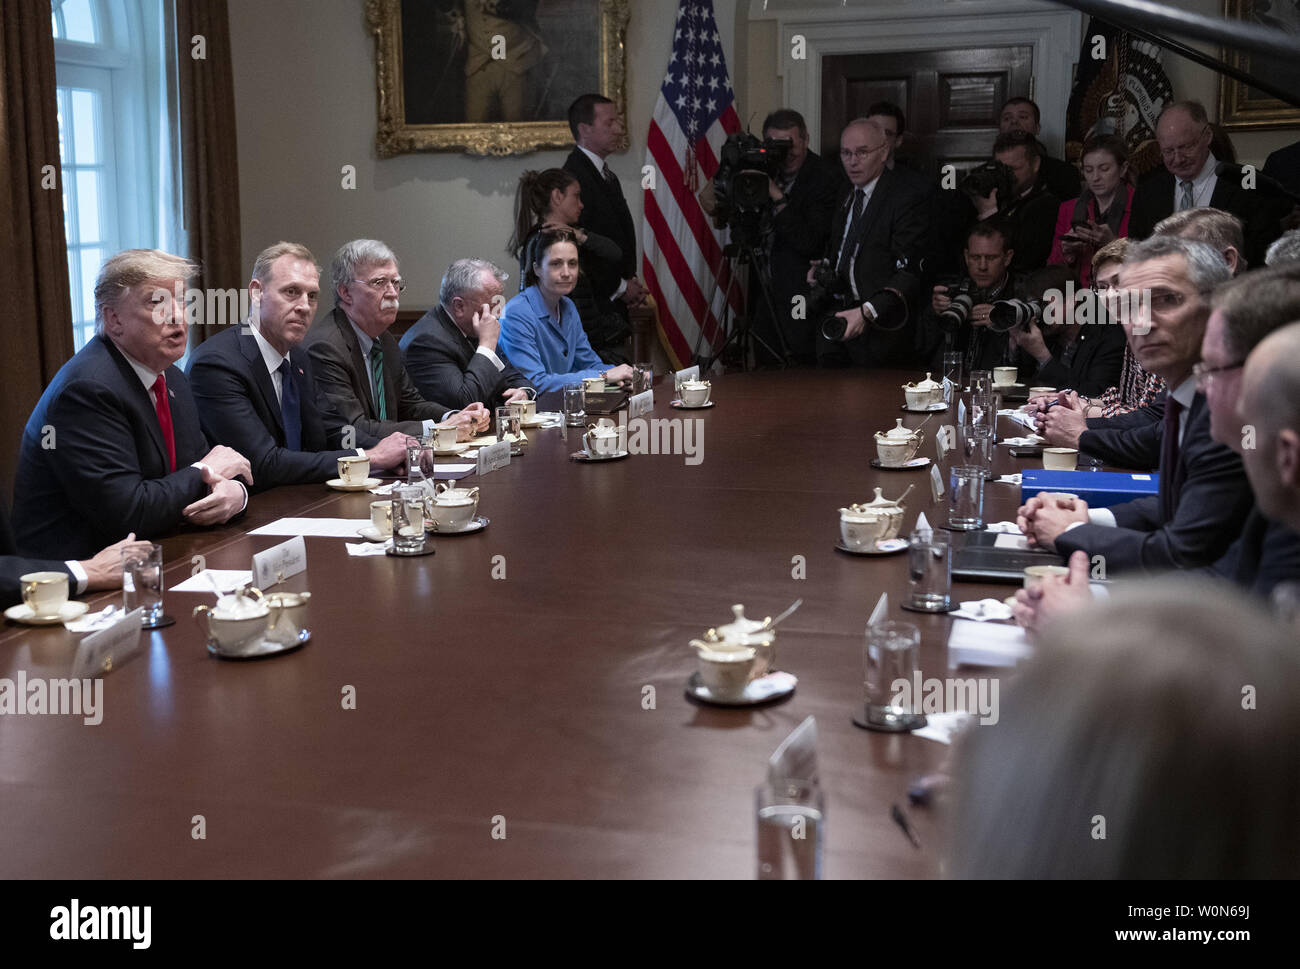 United States President Donald Trump (L) participates in an expanded bilateral meeting with Jens Stoltenberg (R), Secretary General of the North Atlantic Treaty Organization (NATO),  in the Cabinet Room of the White House in Washington, DC on Tuesday, April 2, 2019.   Photo by Ron Sachs/UPI Stock Photo